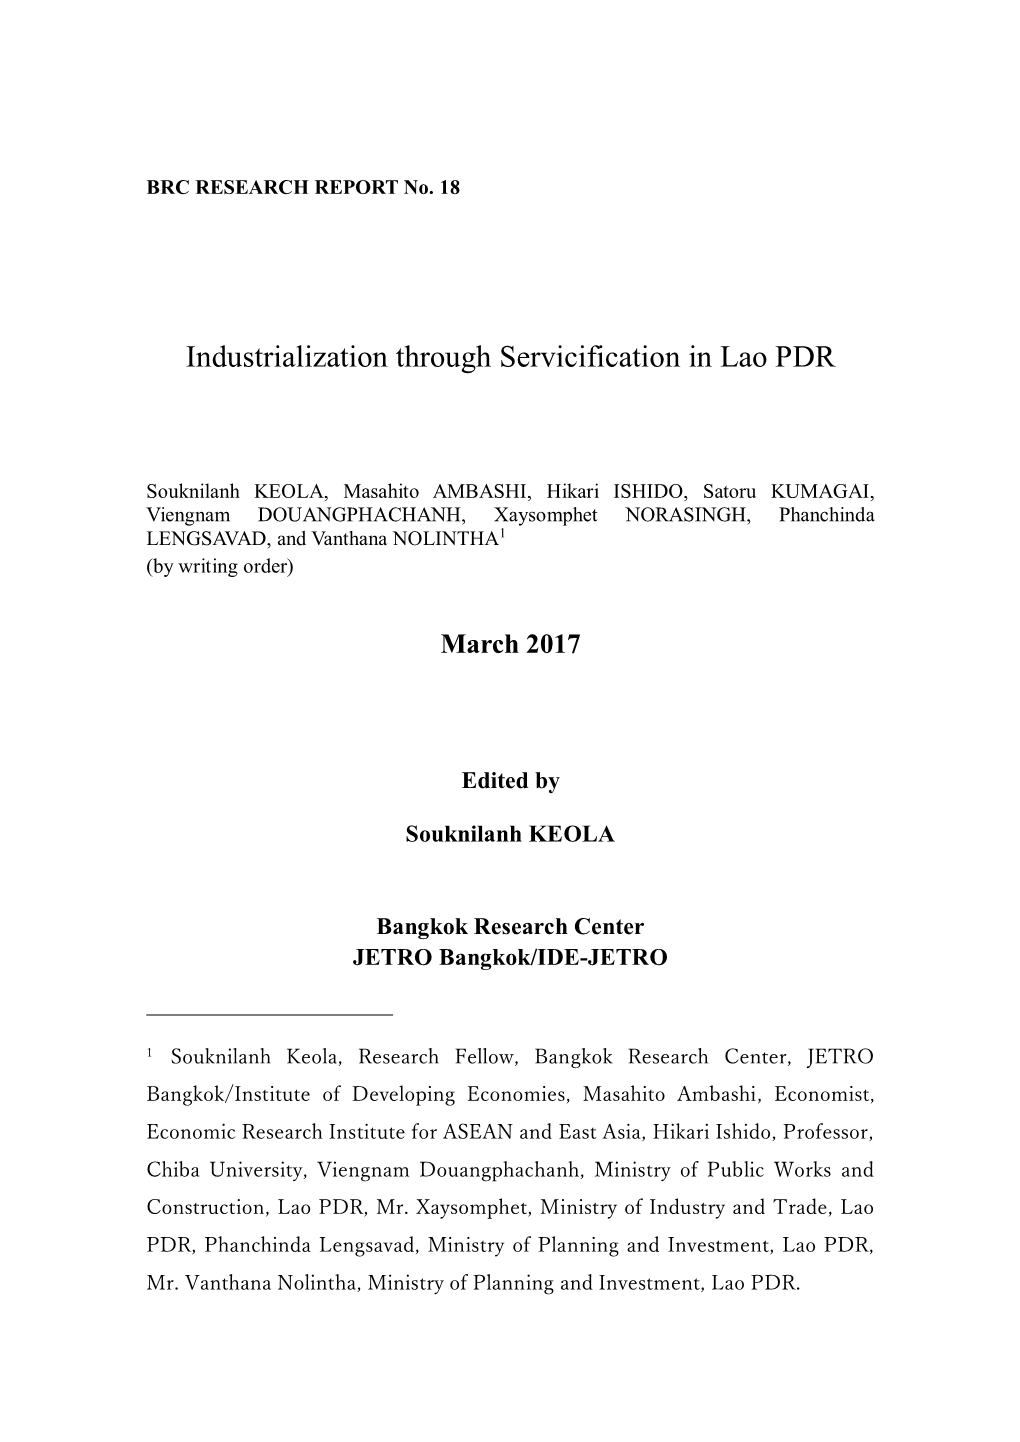 Industrialization Through Servicification in Lao PDR